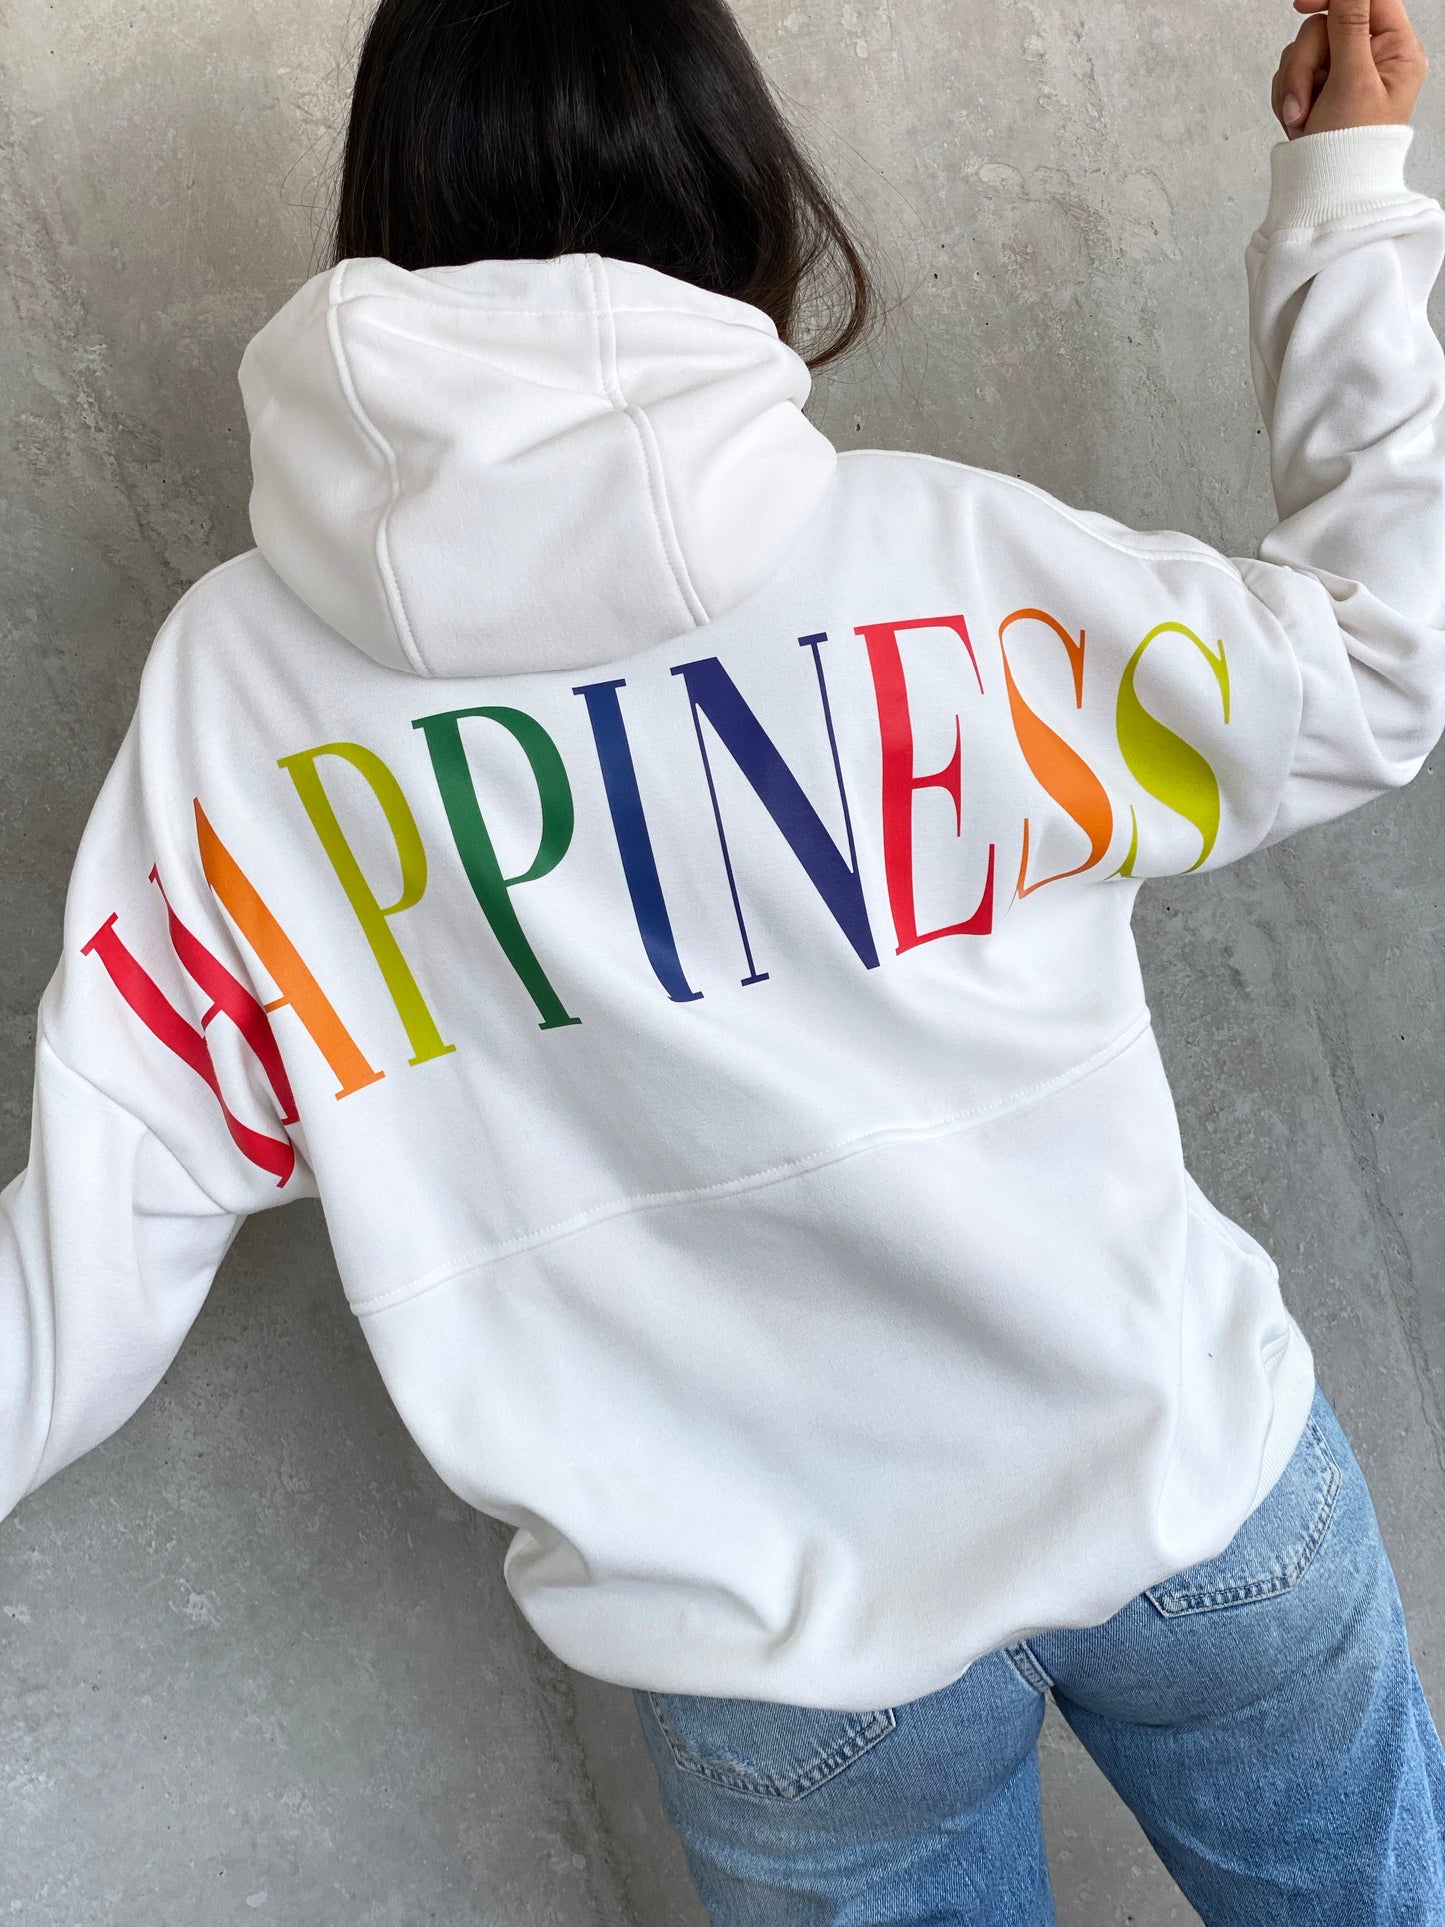 Perfecto Imperfecto Hoodie Hapiness Talla S/M #140